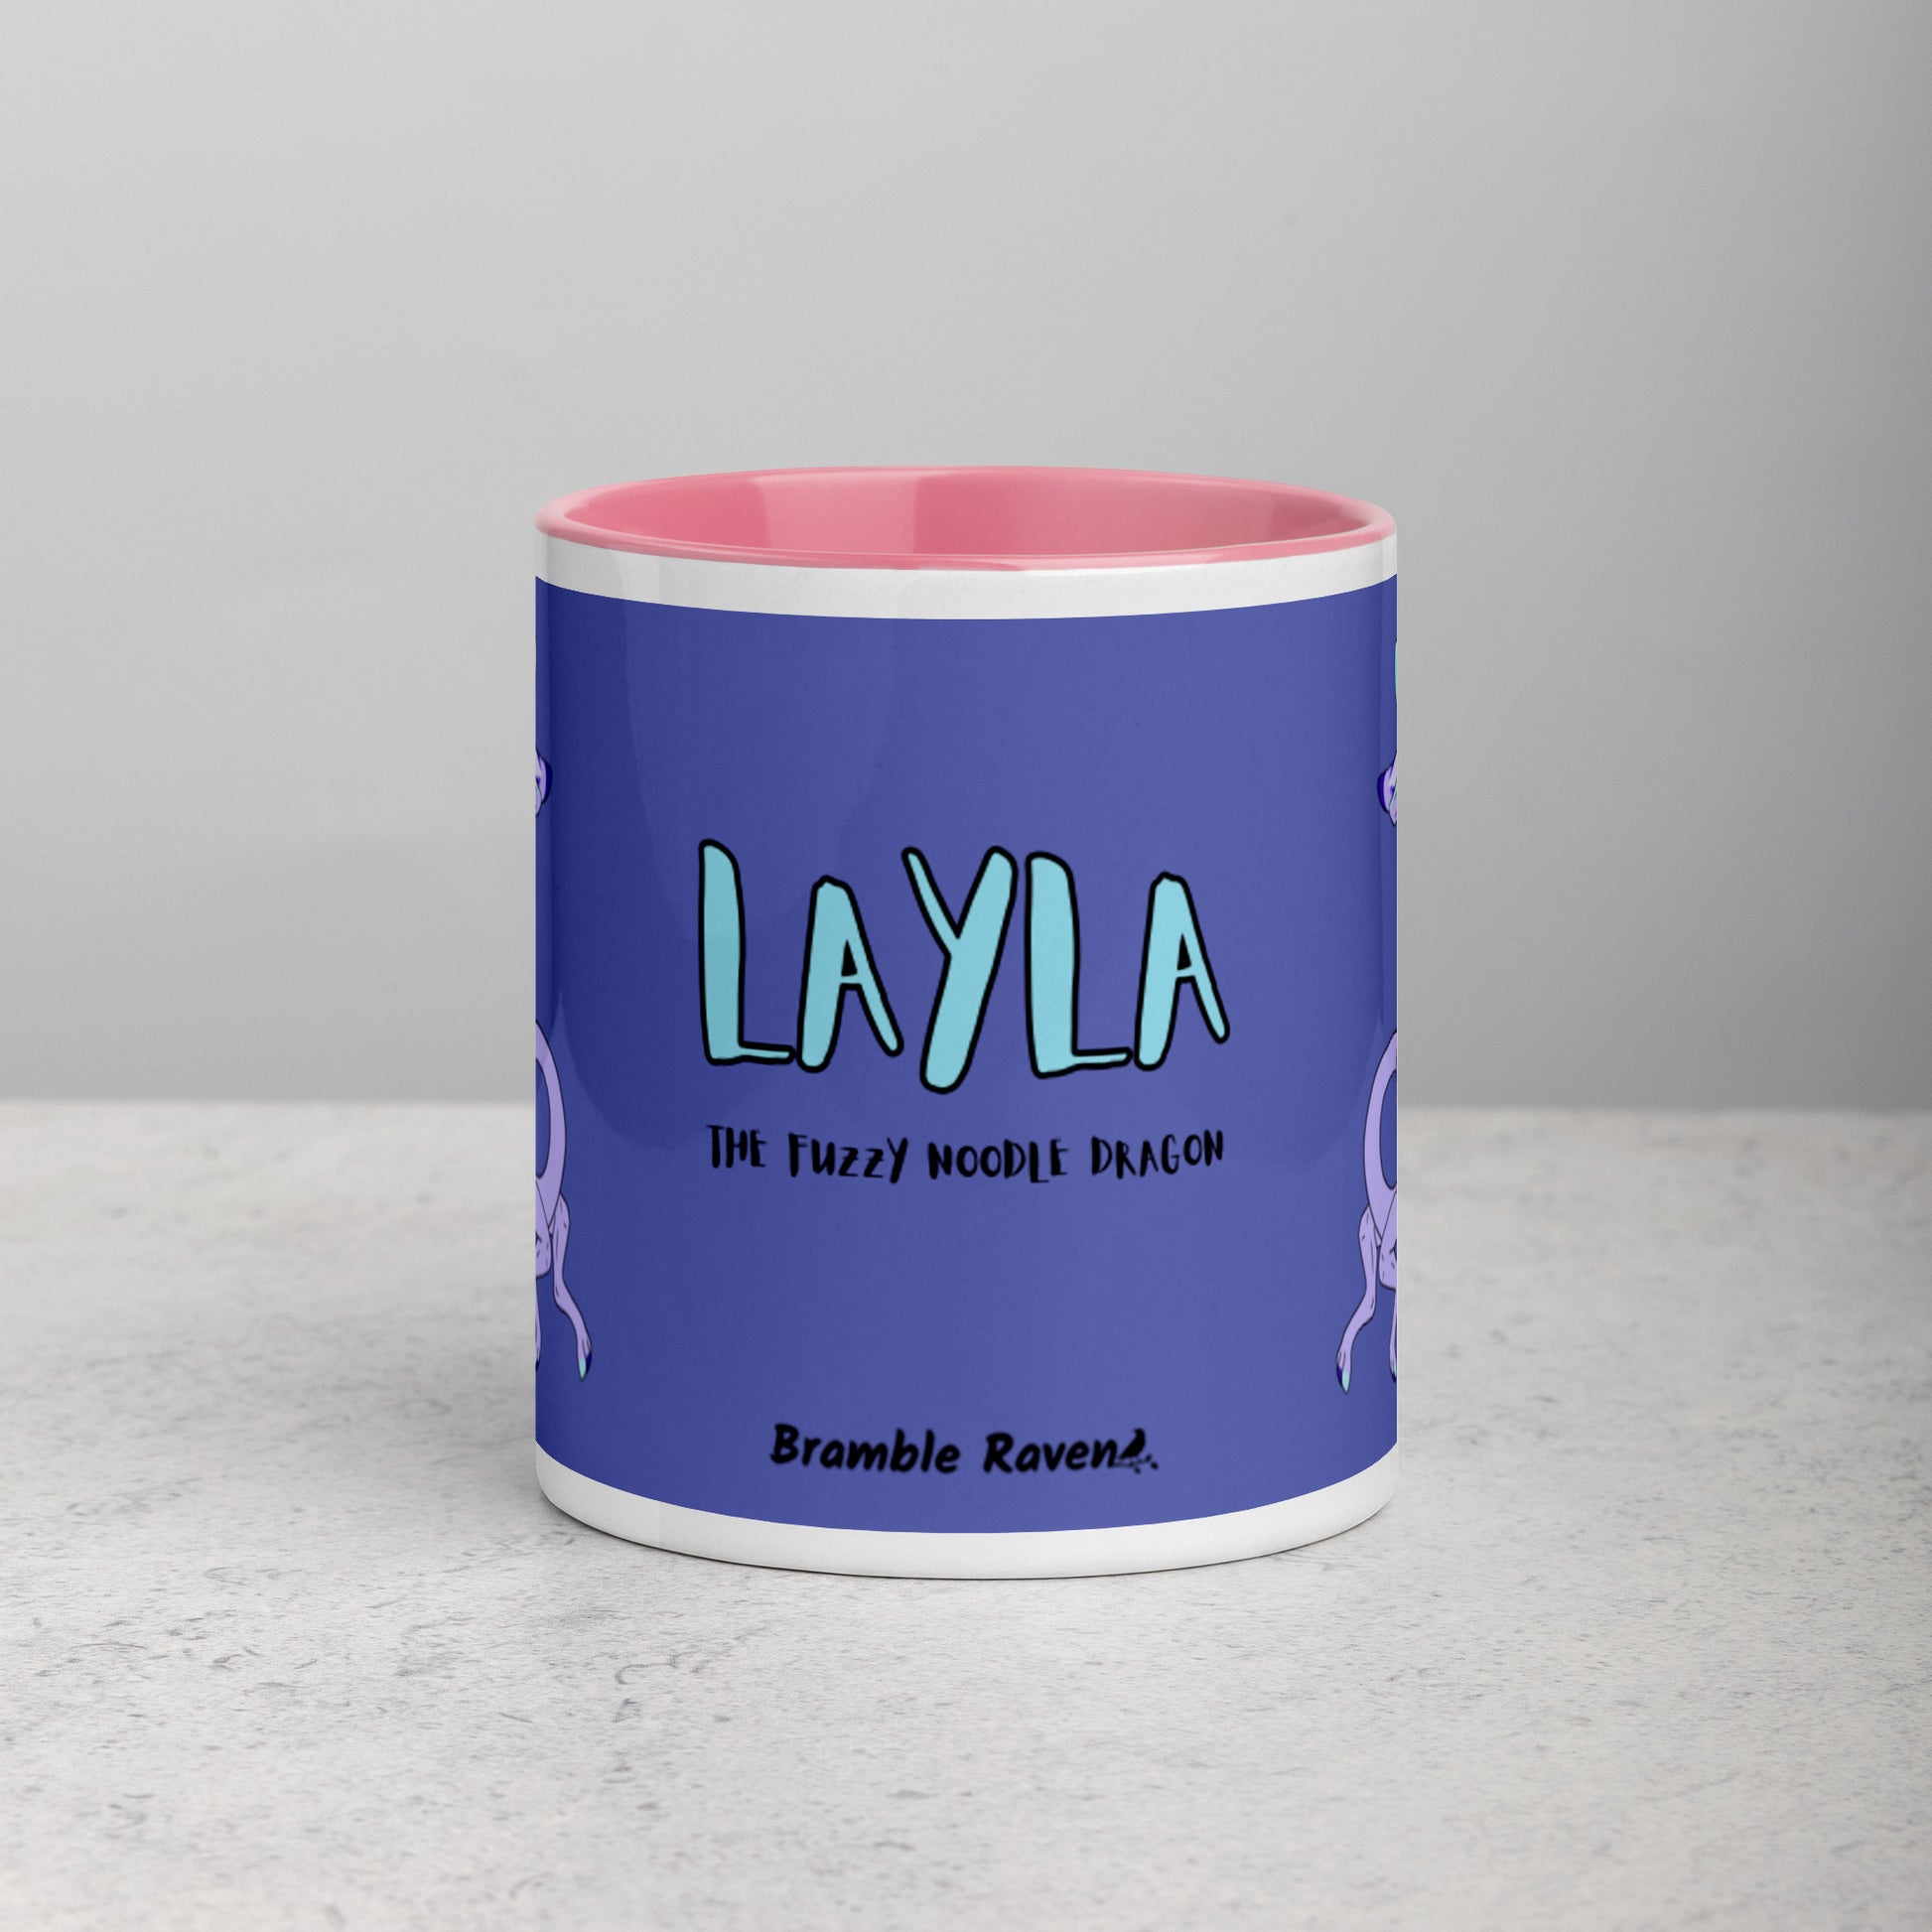 11 ounce white ceramic mug. Pink inside and handle. Features double-sided image of Layla the Lavender Fuzzy Noodle Dragon. Shown on tabletop. Front view shows Layla the Fuzzy Noodle Dragon text and Bramble Raven logo.